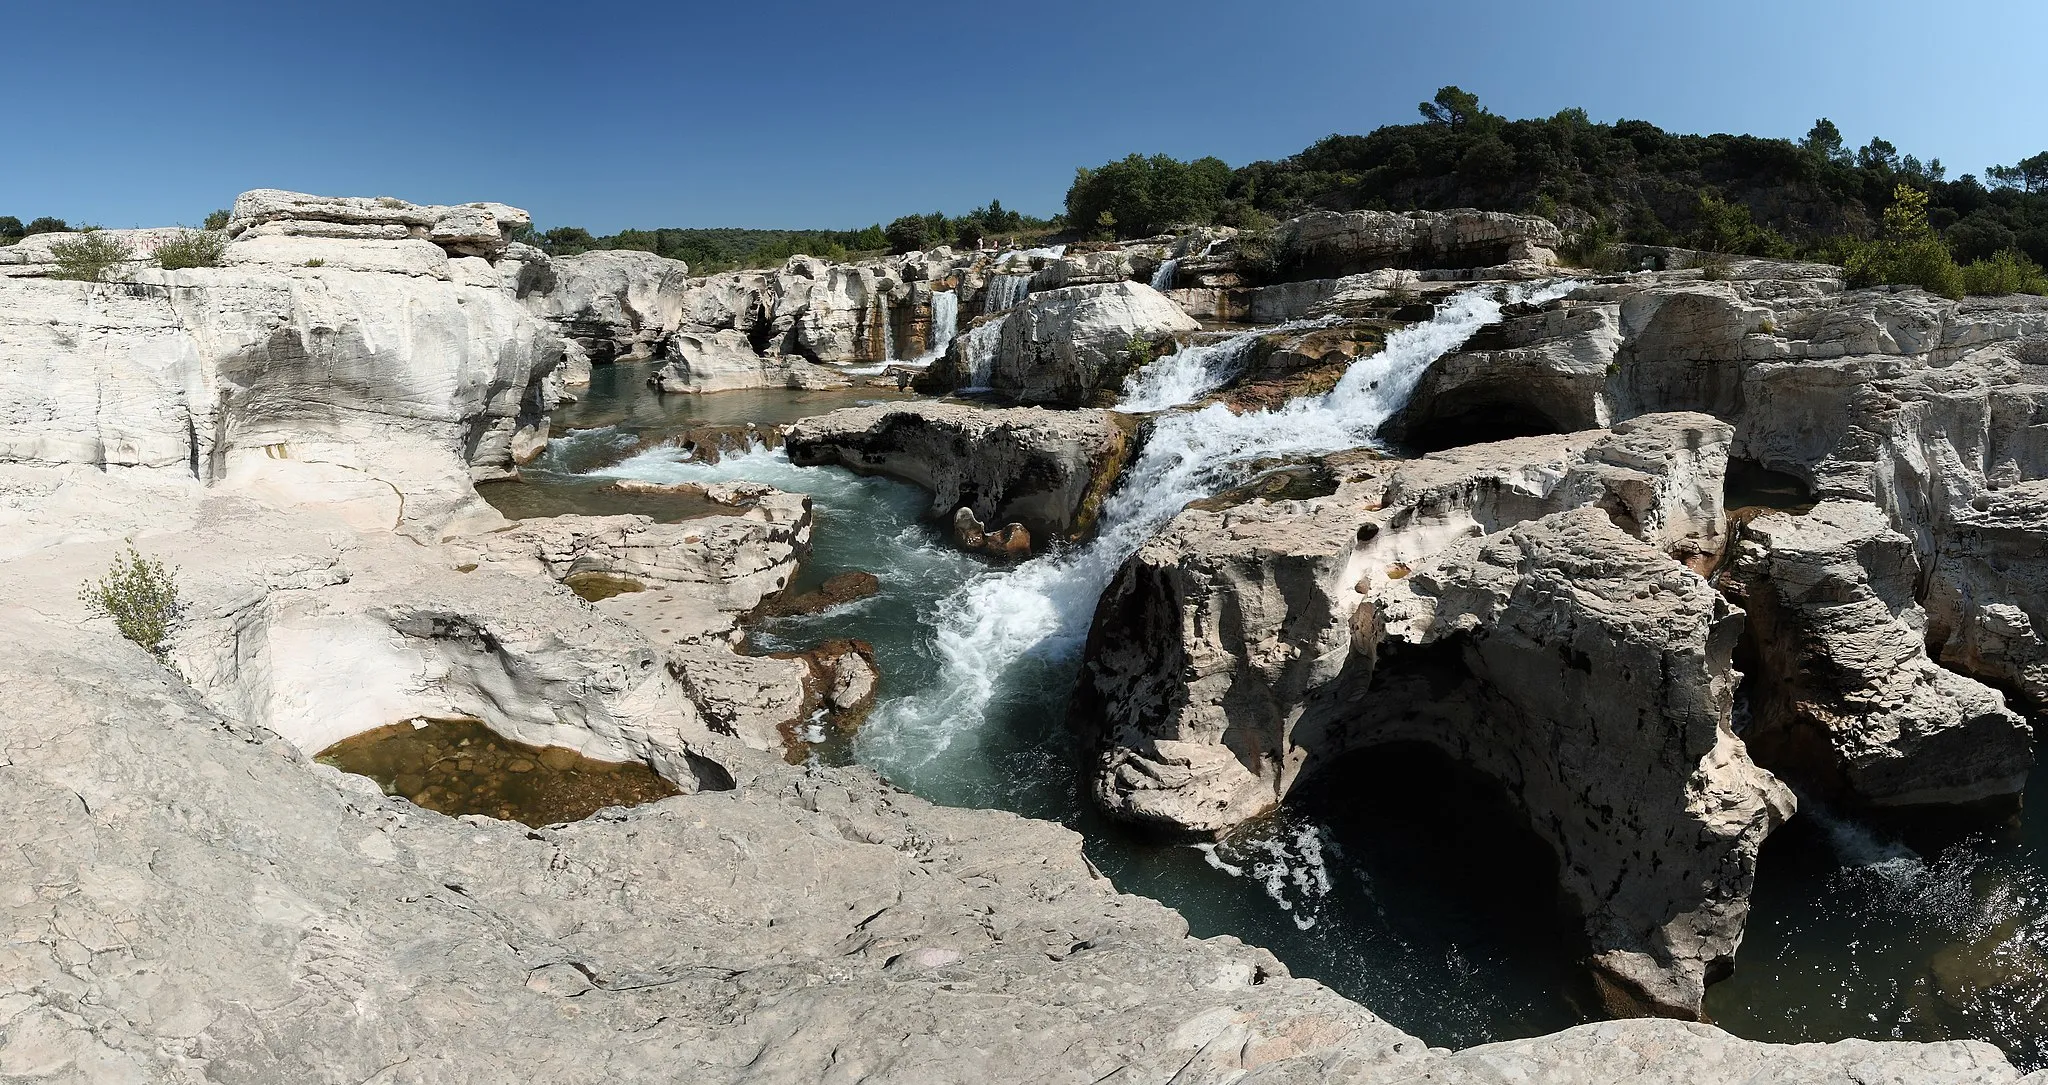 Photo showing: Sautadets Waterfalls on the Cèze river, near Bagnols-sur-Cèze, in the Gard department, south of France